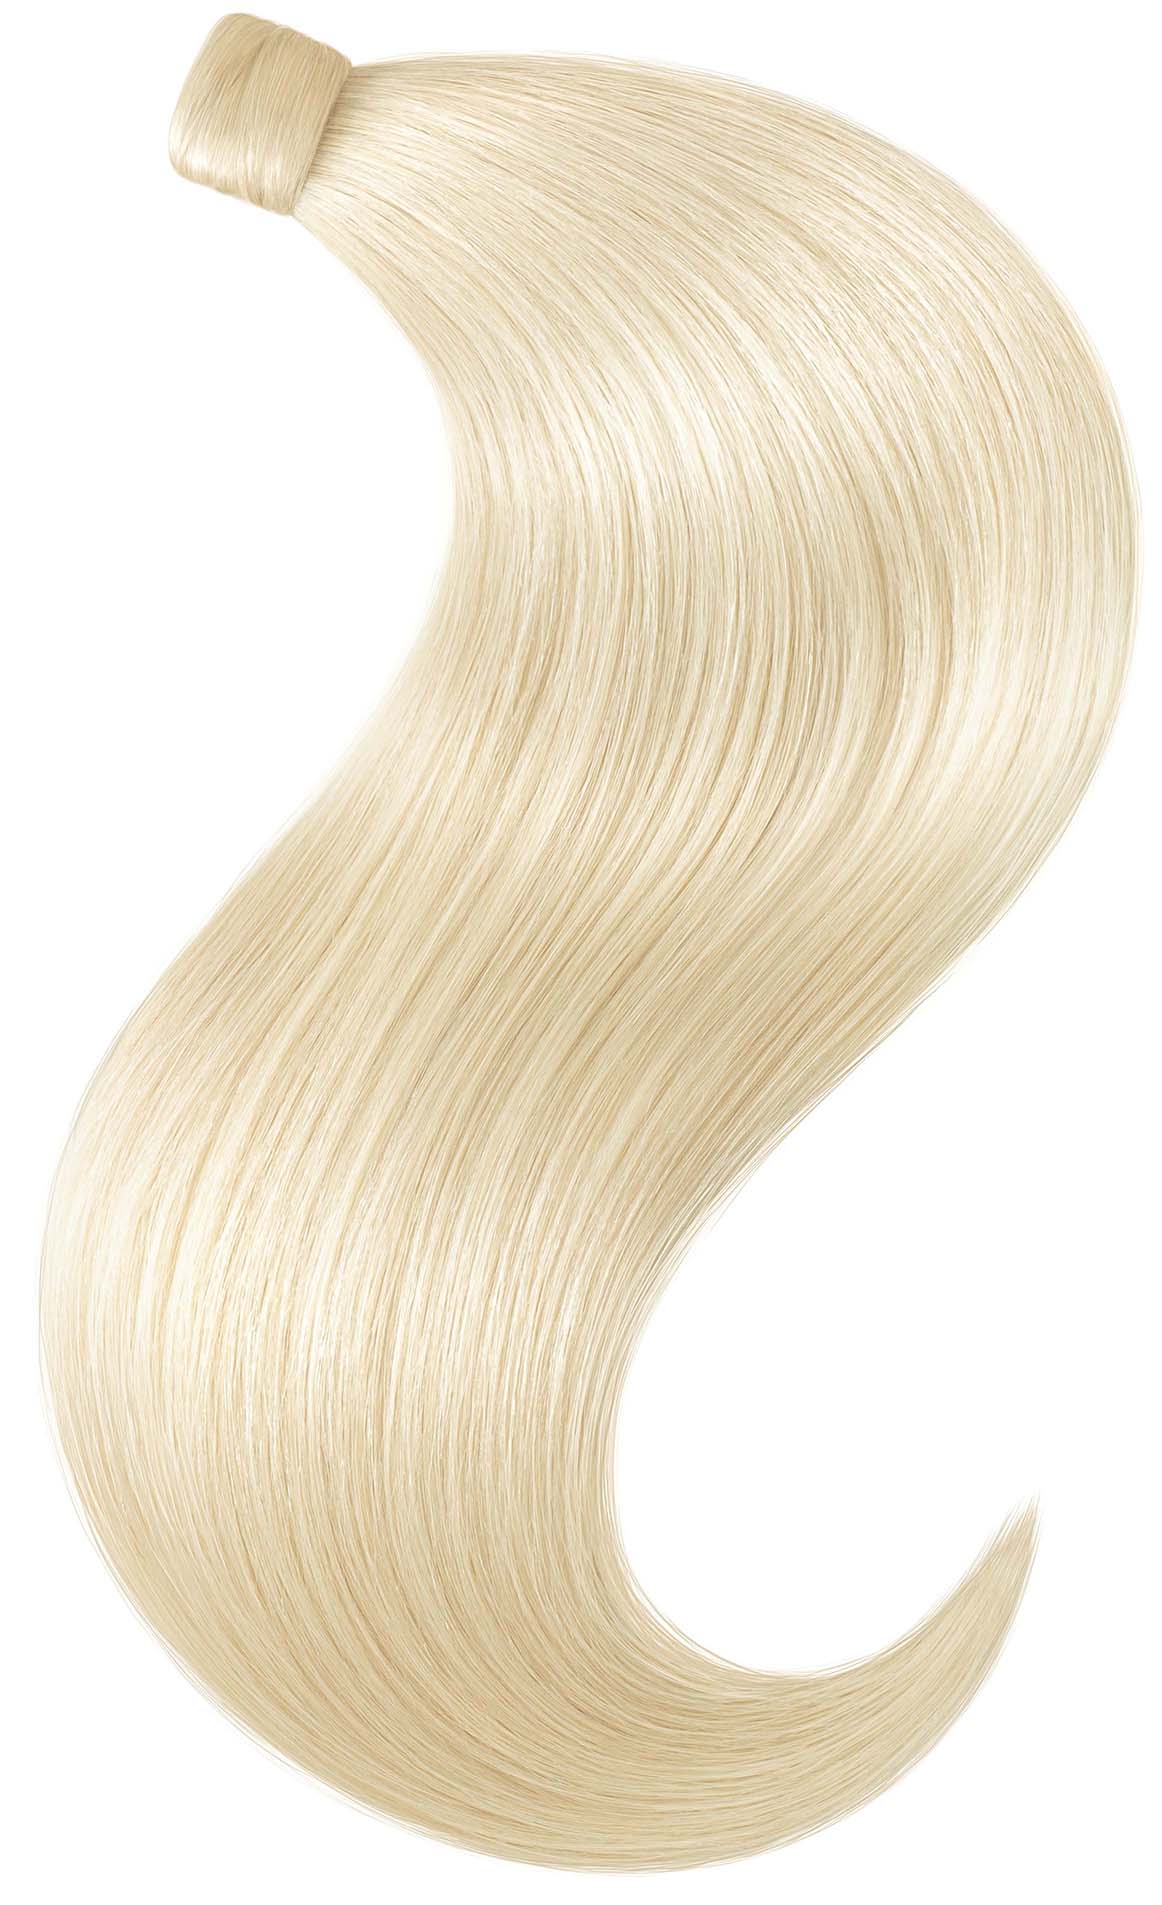 PONYTAIL Hellblond Clip-in Pony Extensions